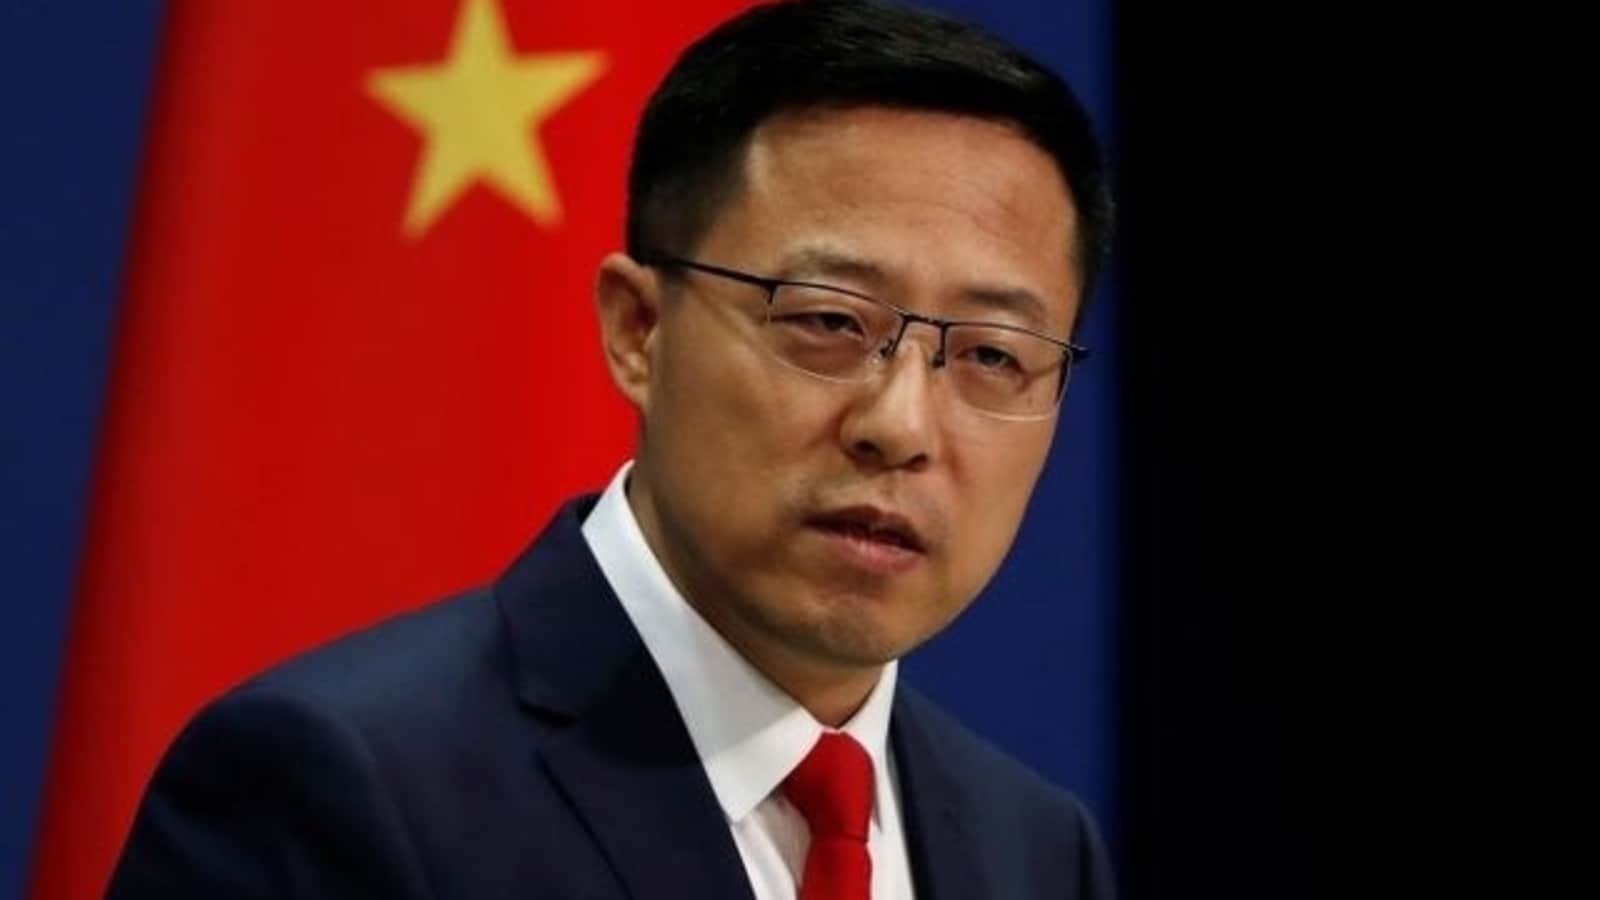 Chinese officials have urged the British government not to exaggerate the threat posed by China.